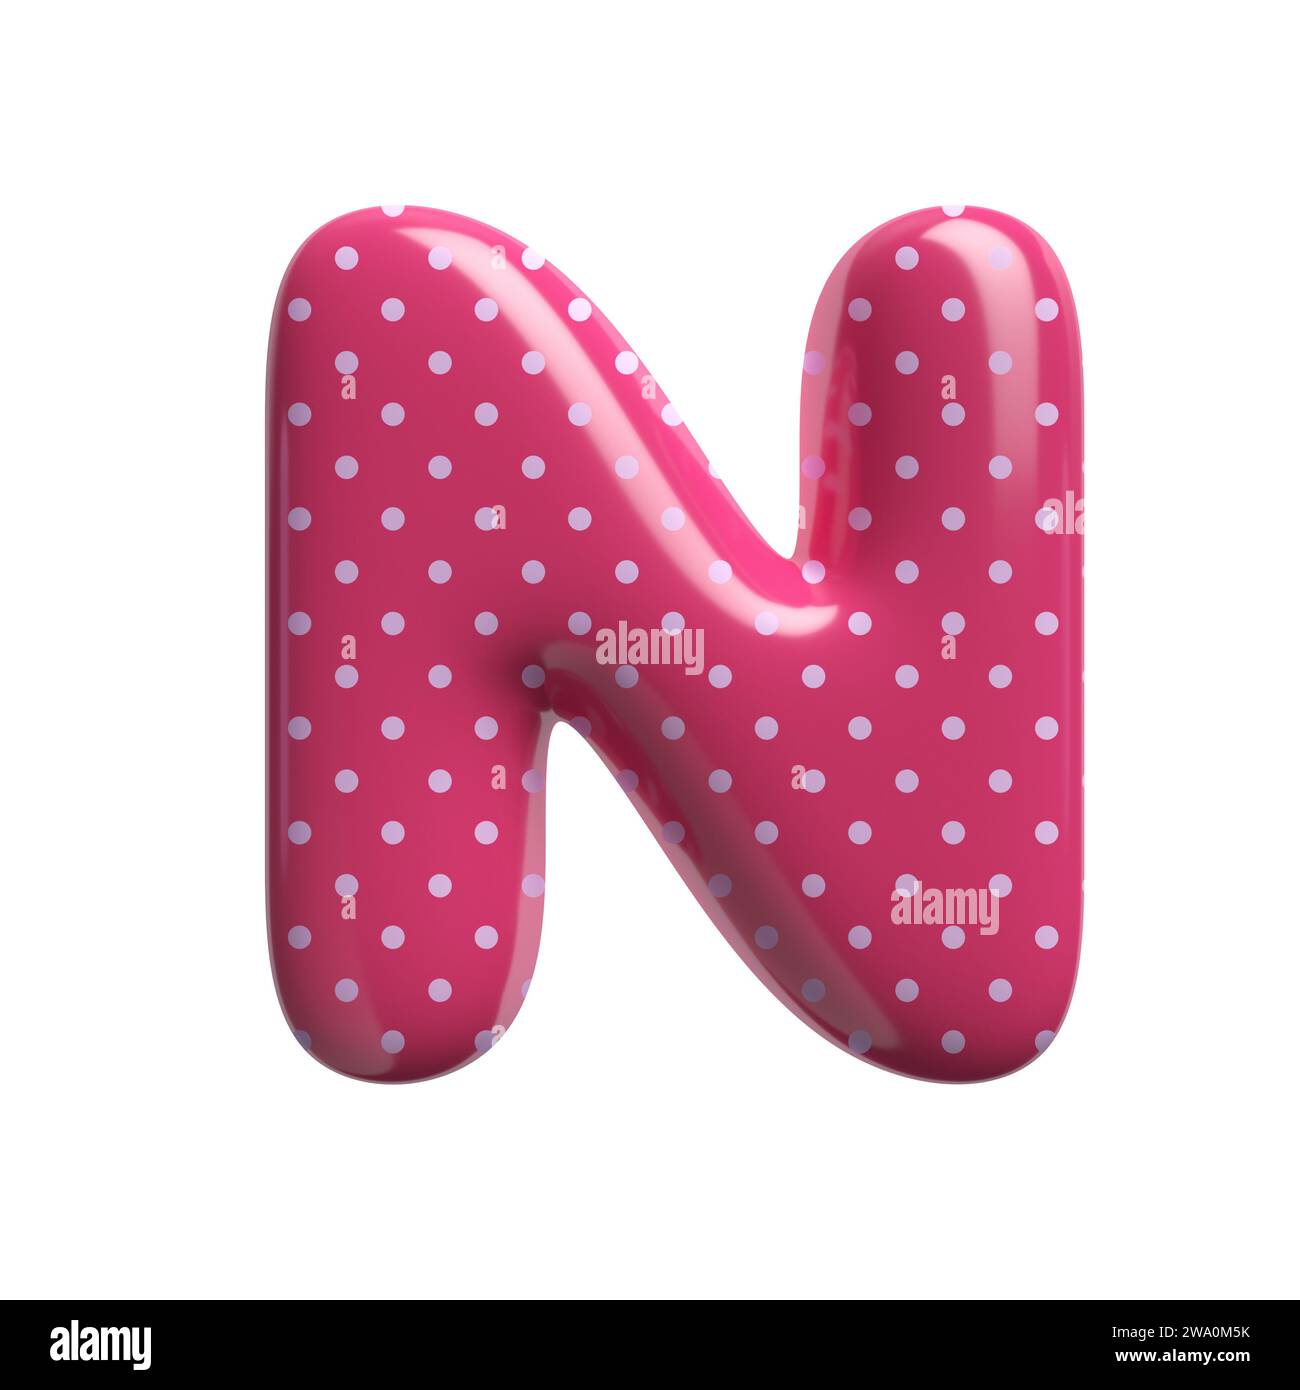 Polka dot letter N - Capital 3d pink retro font - suitable for Fashion, retro design or decoration related subjects Stock Photo